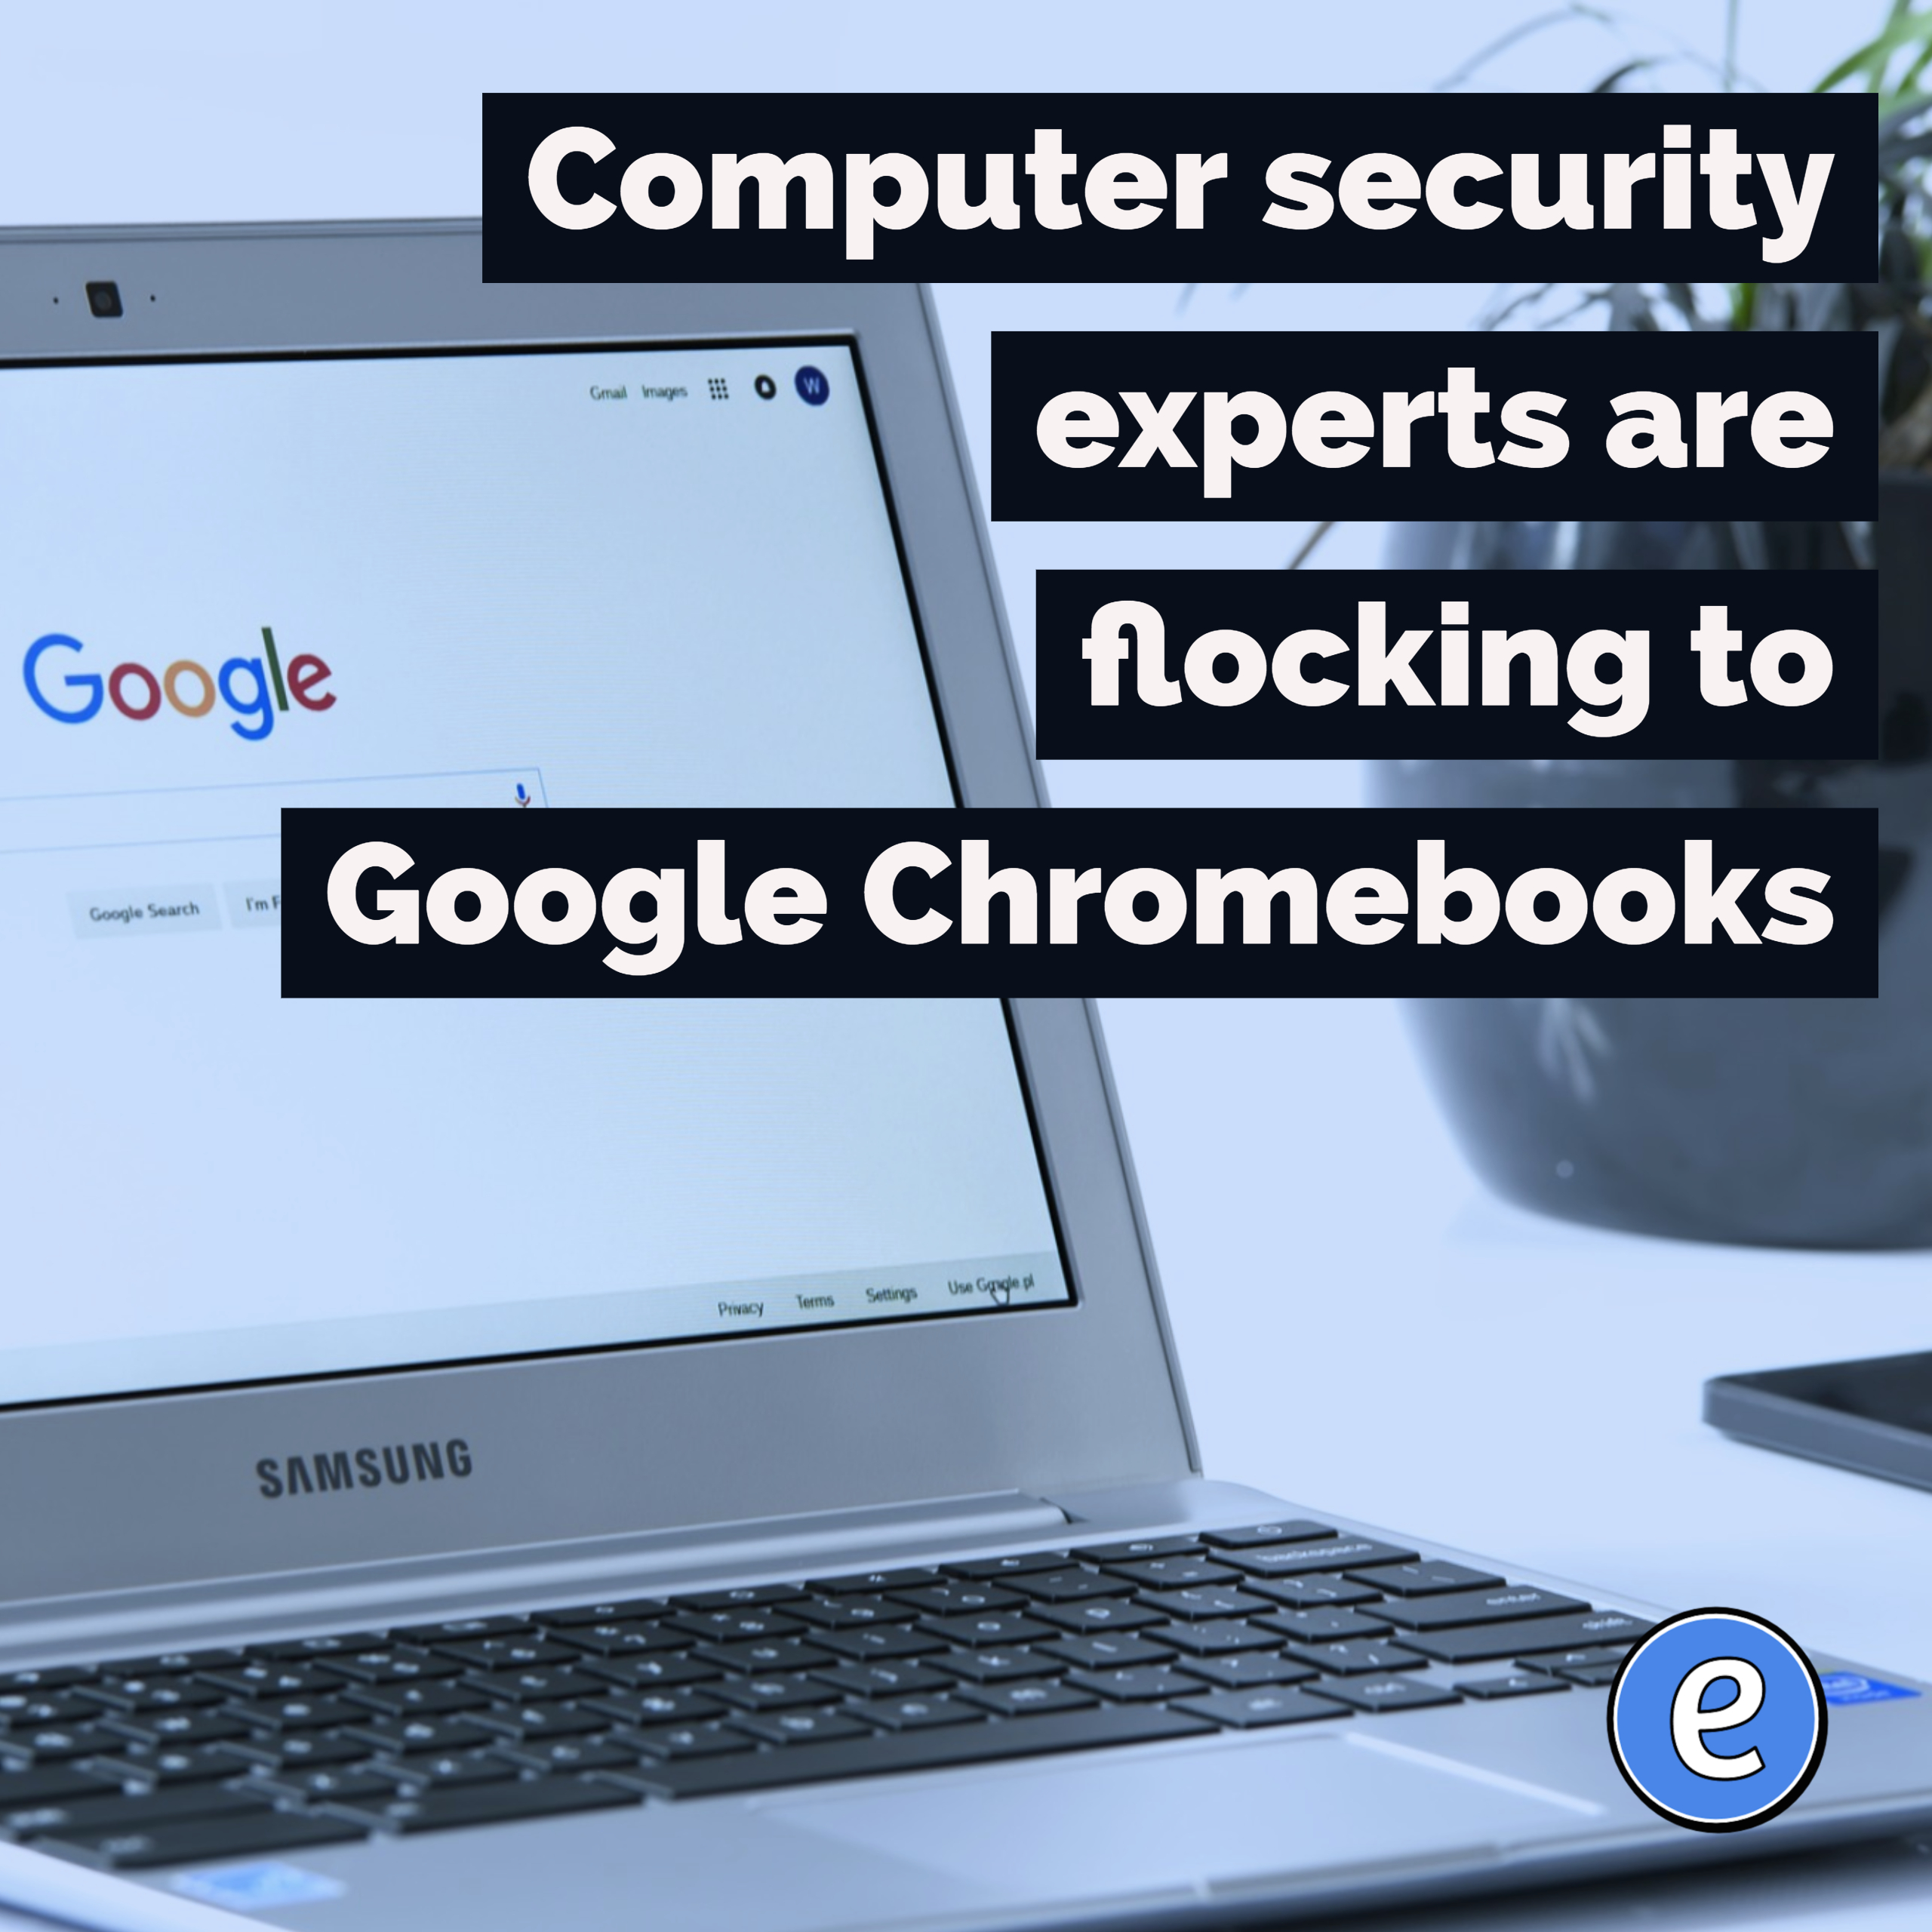 Computer security experts are flocking to Google Chromebooks